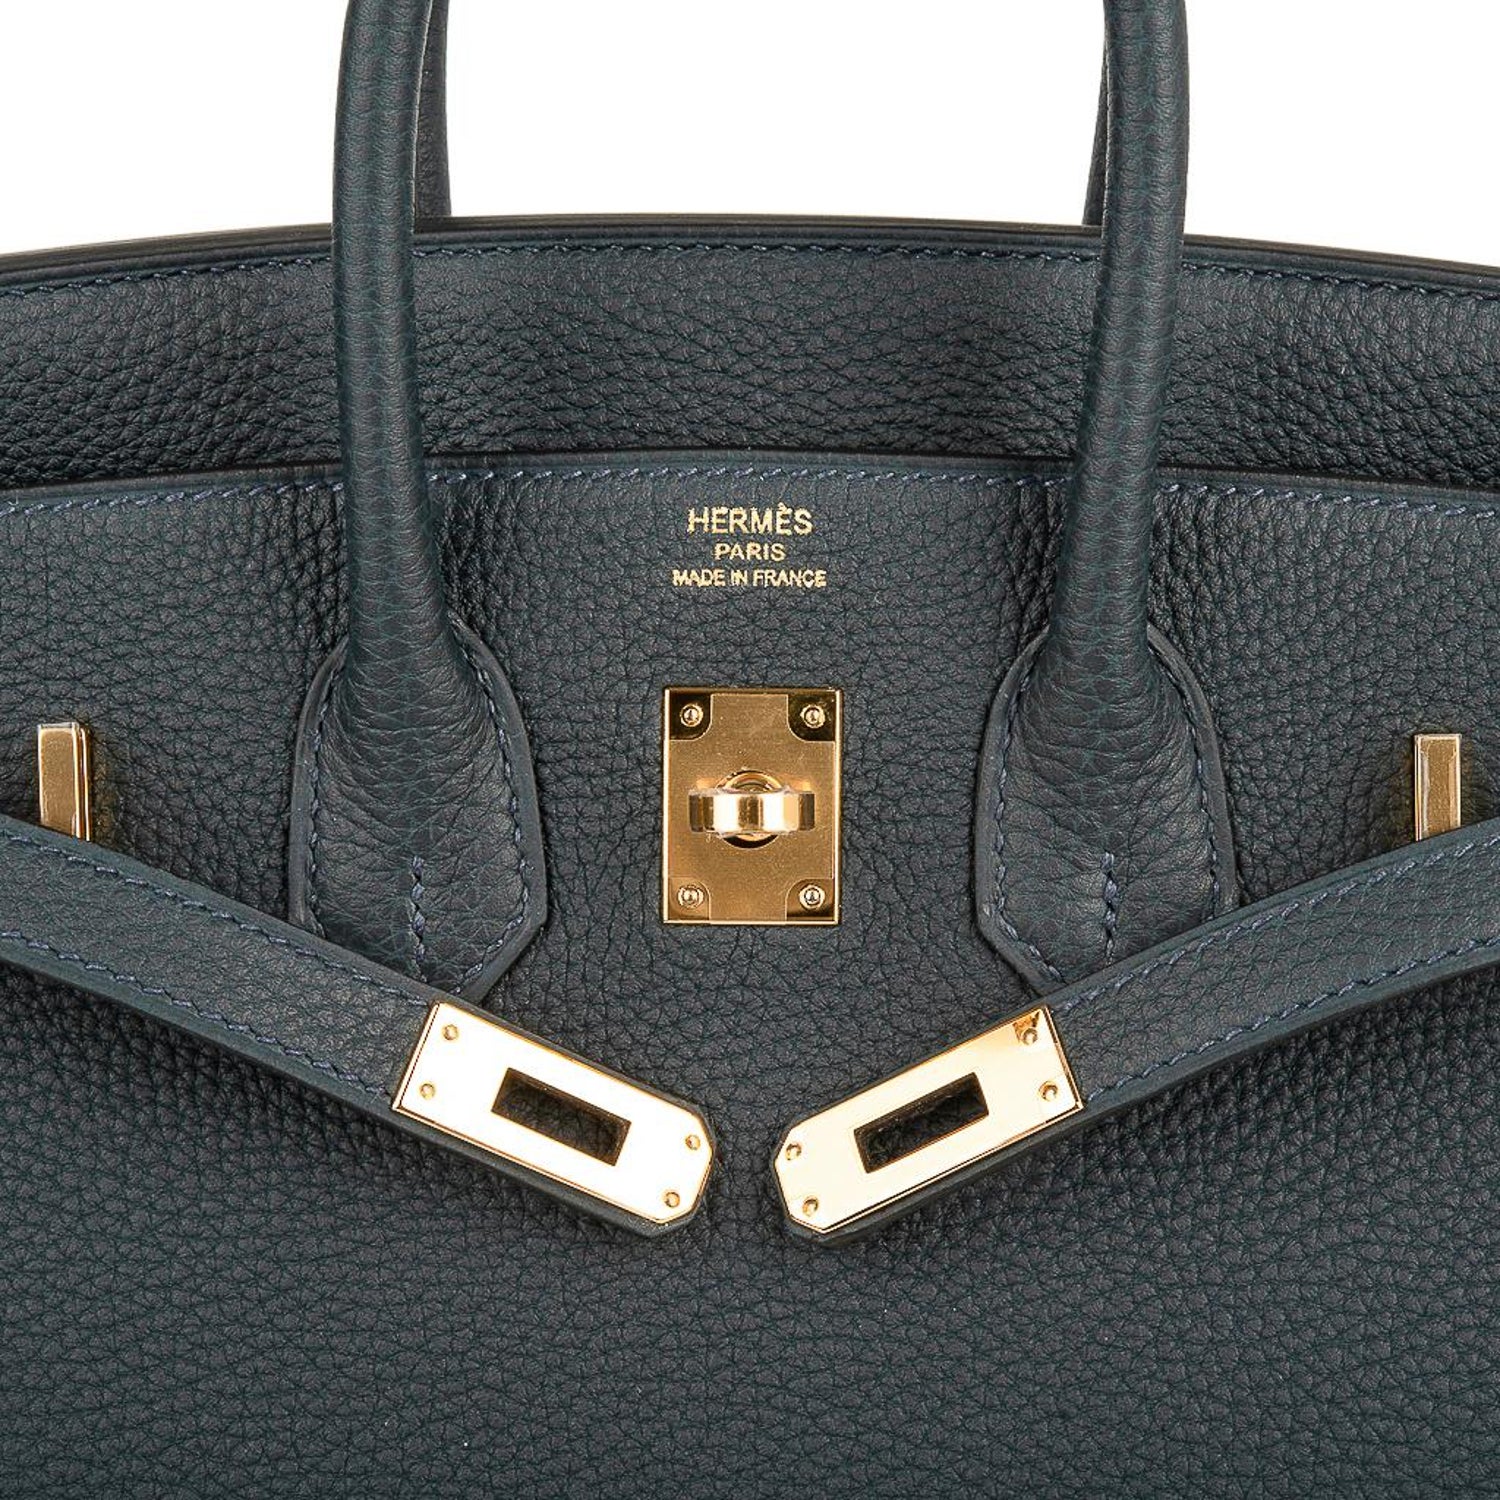 10 mind blowing facts on the Hermes Birkin bags